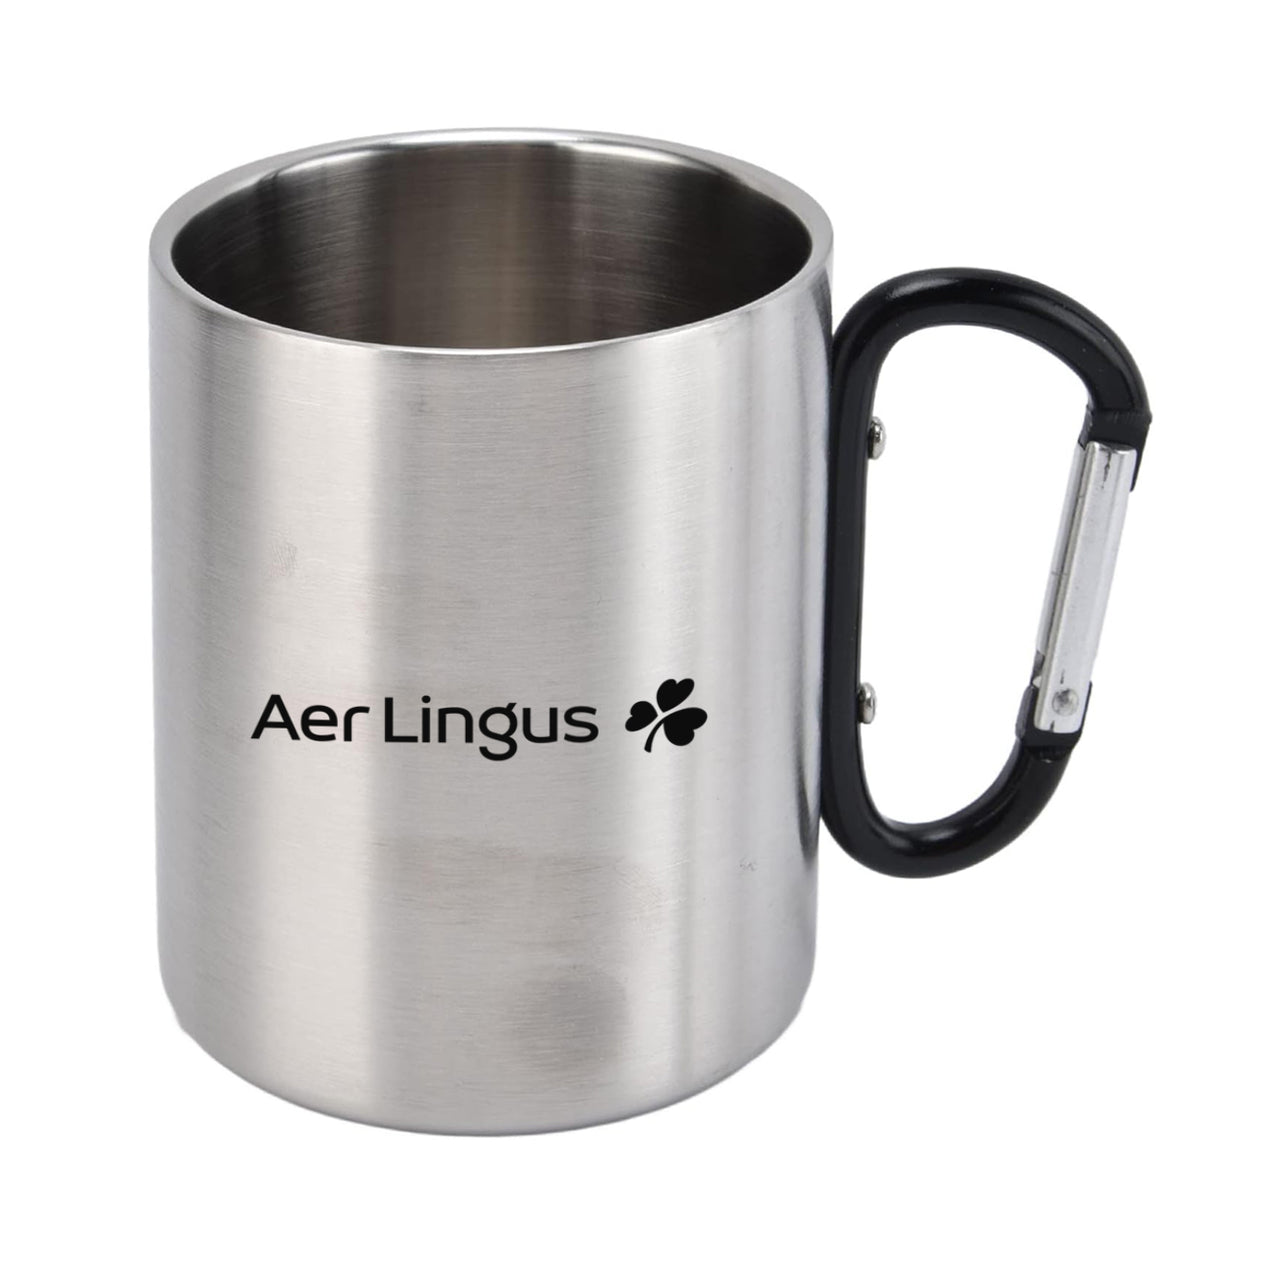 Aer Lingus Airlines Designed Stainless Steel Outdoors Mugs